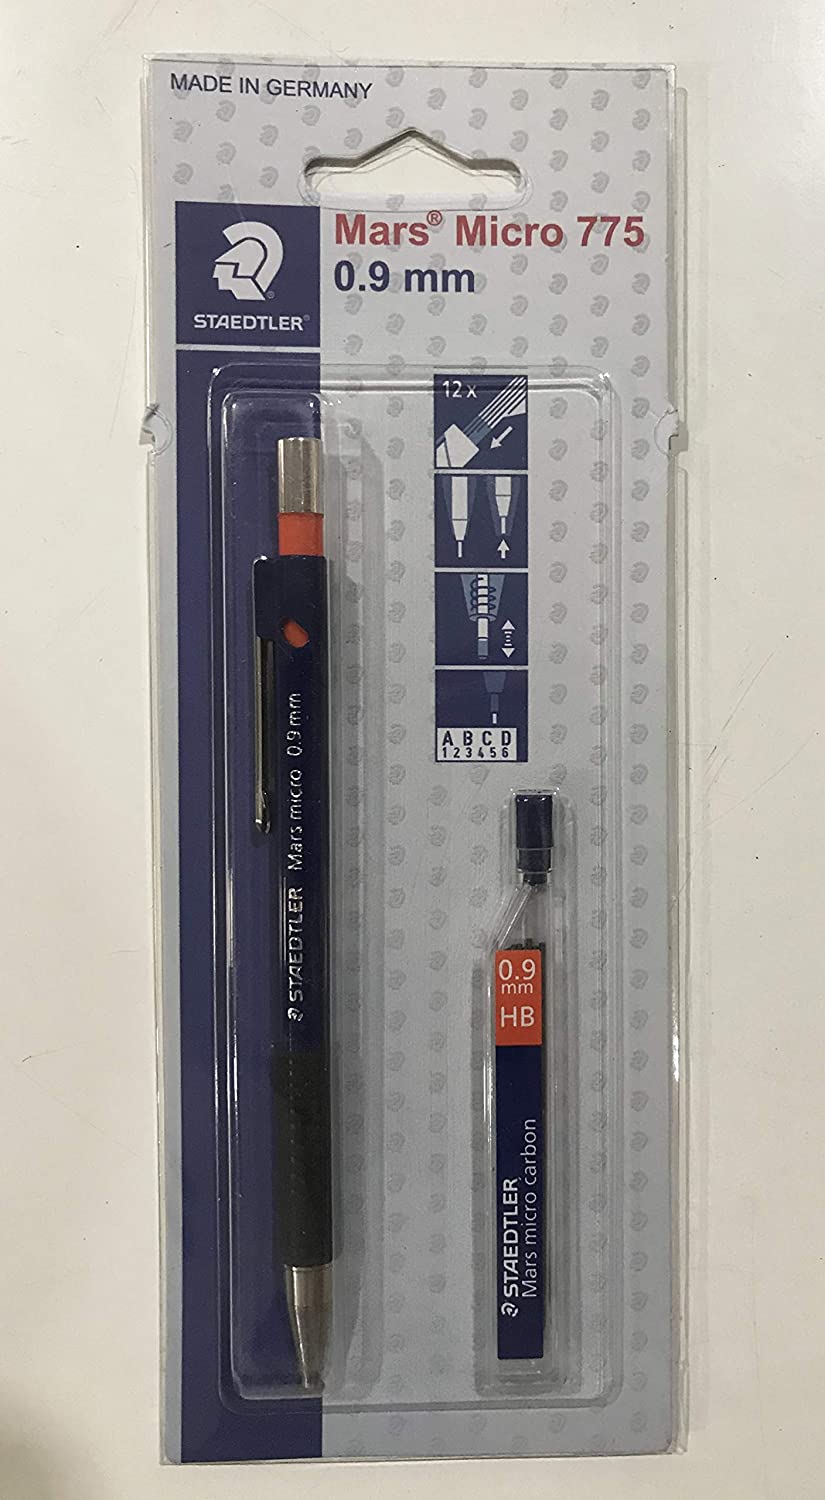 Detec™ Staedtler Mars micro Mechanical pencil for writing, drawing & drafting in 0.9 mm with 1 pack of leads